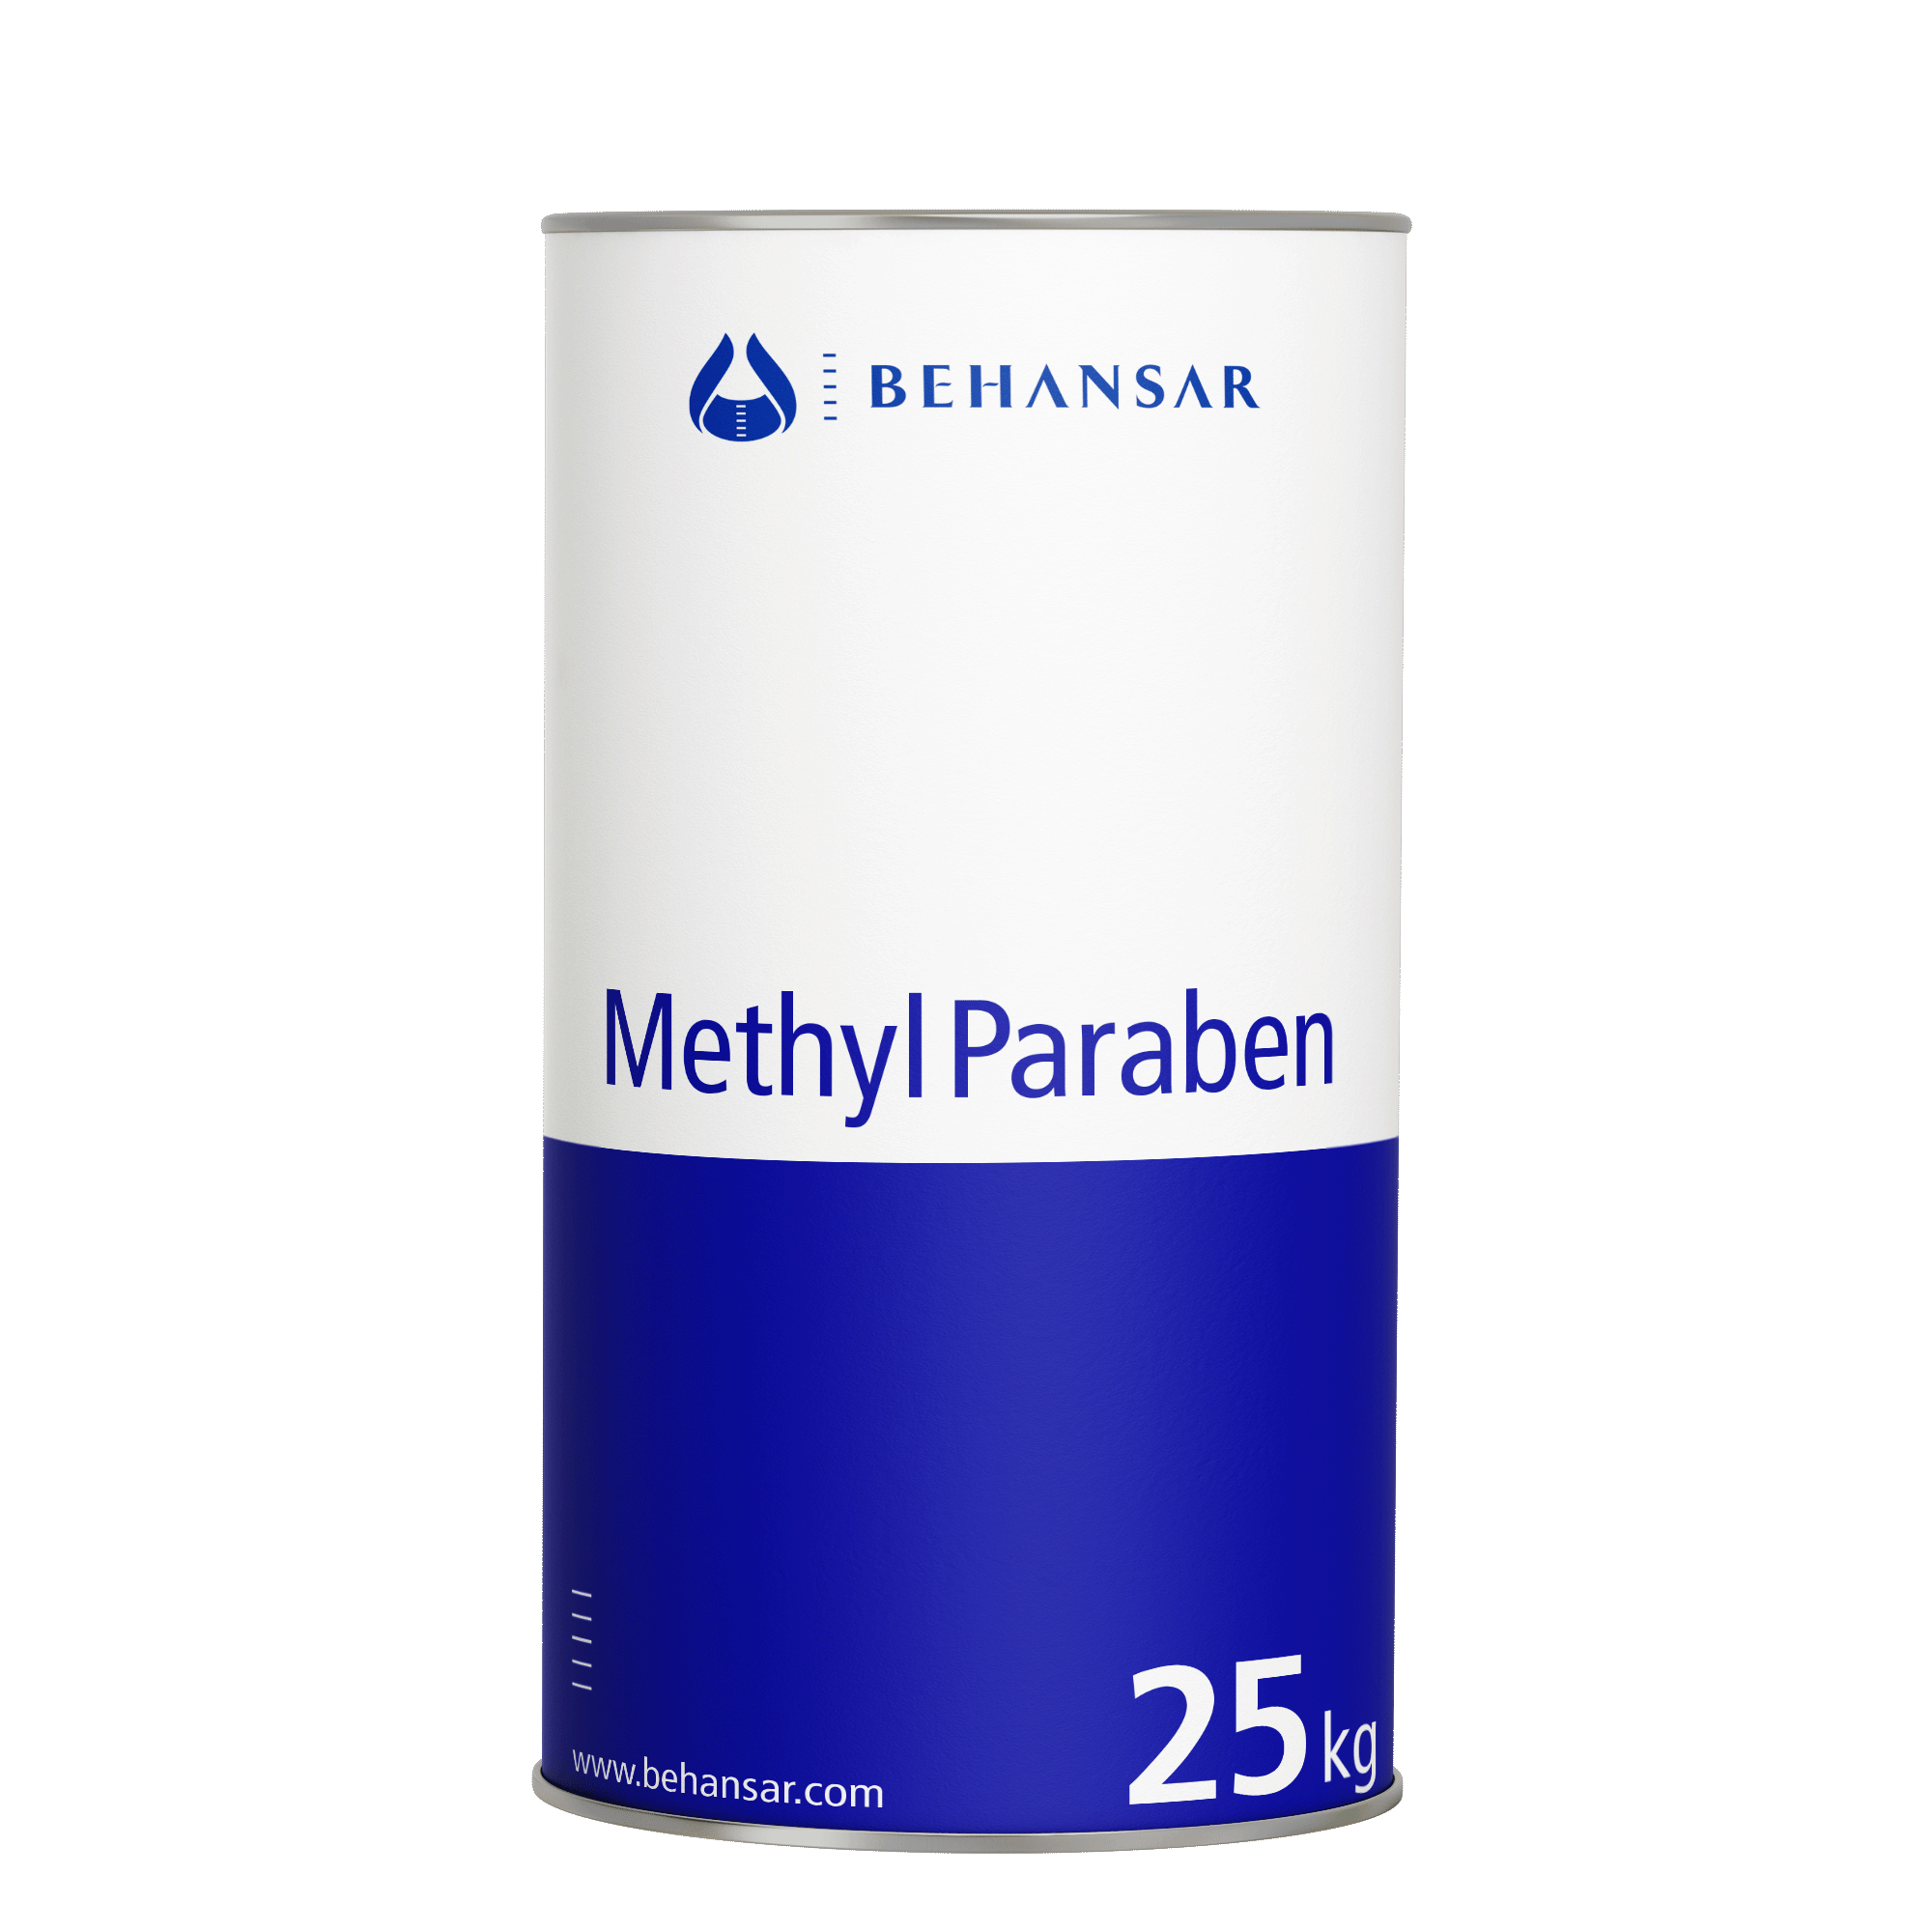 Methyl Paraben is one of the products of Behansar Co